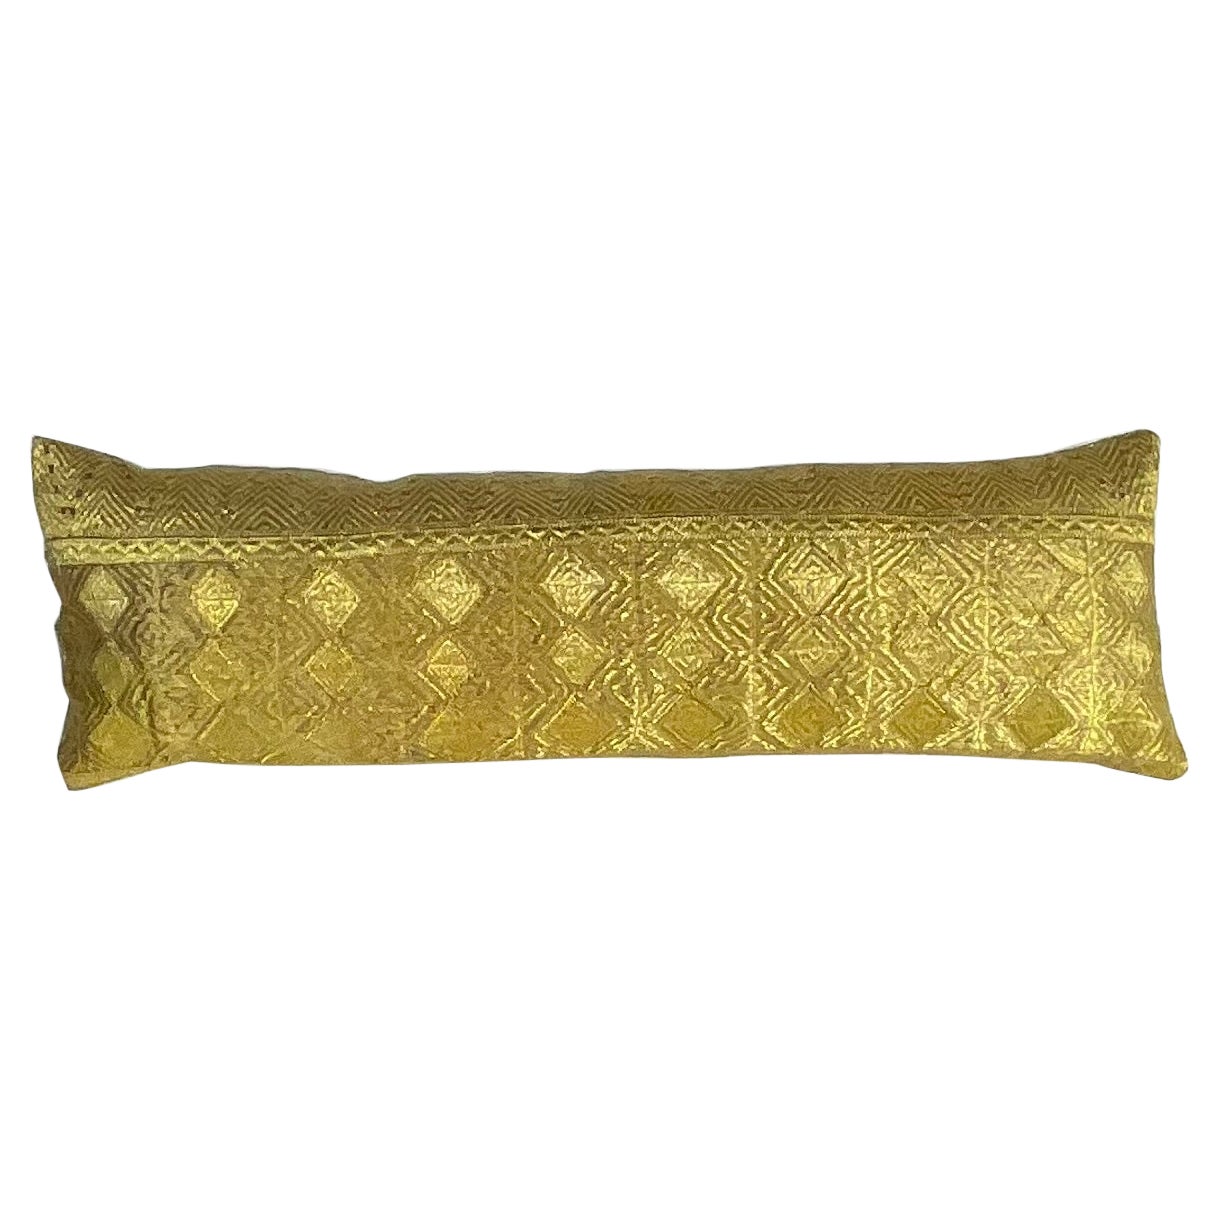 Single Antique Embroidery Textile Pillow For Sale